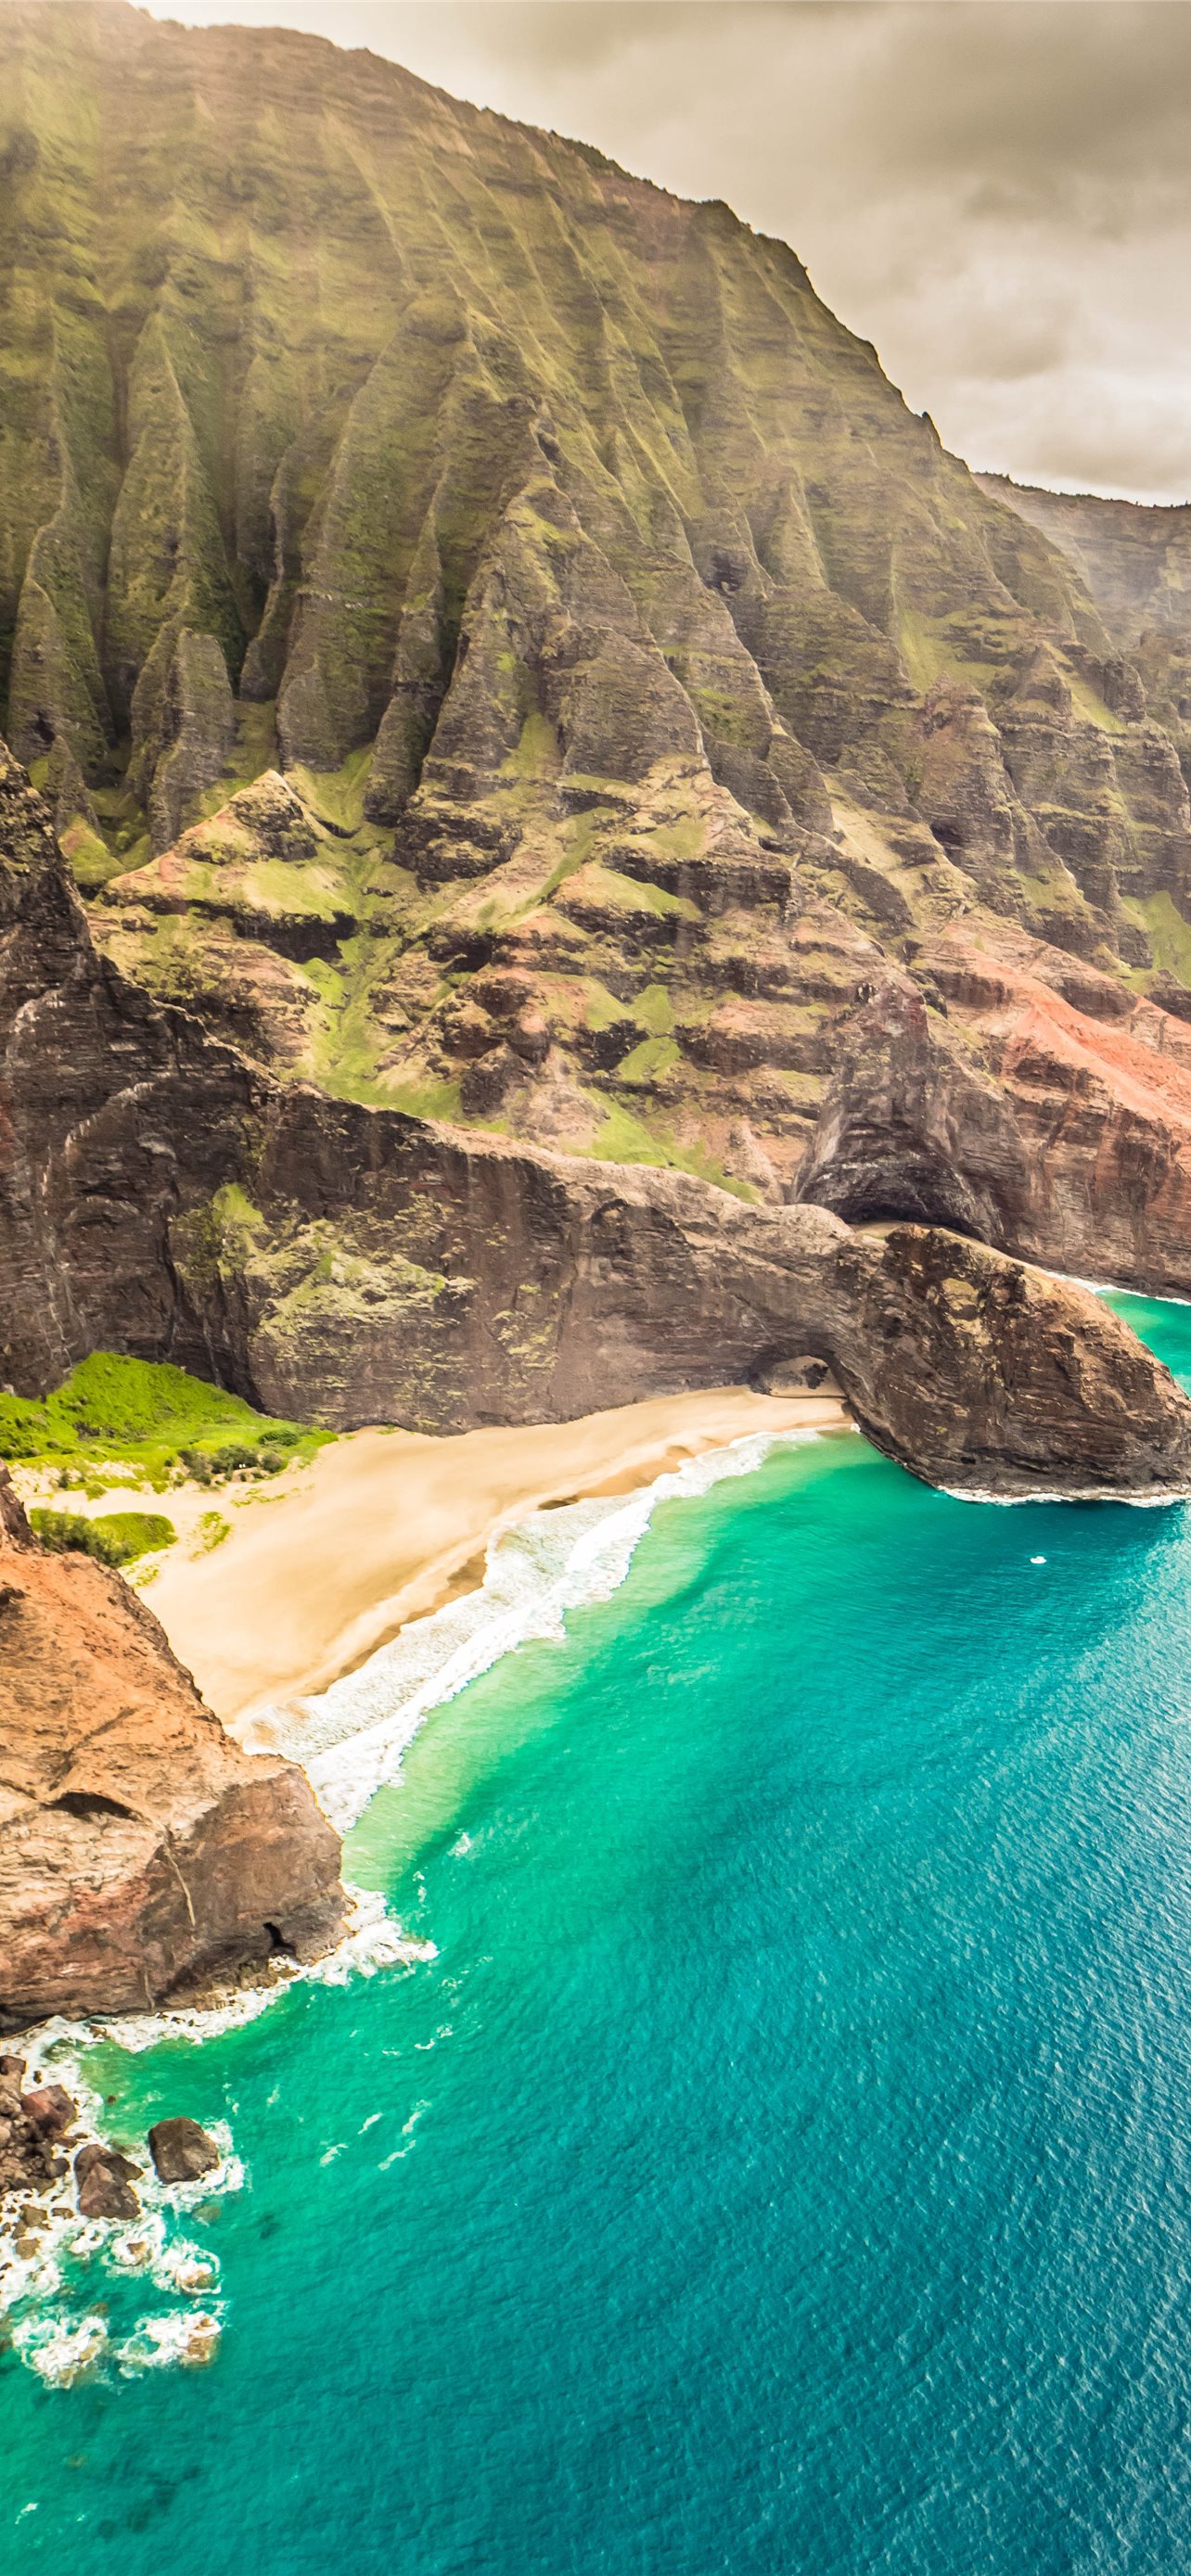 hawaii iPhone Wallpapers Free Download